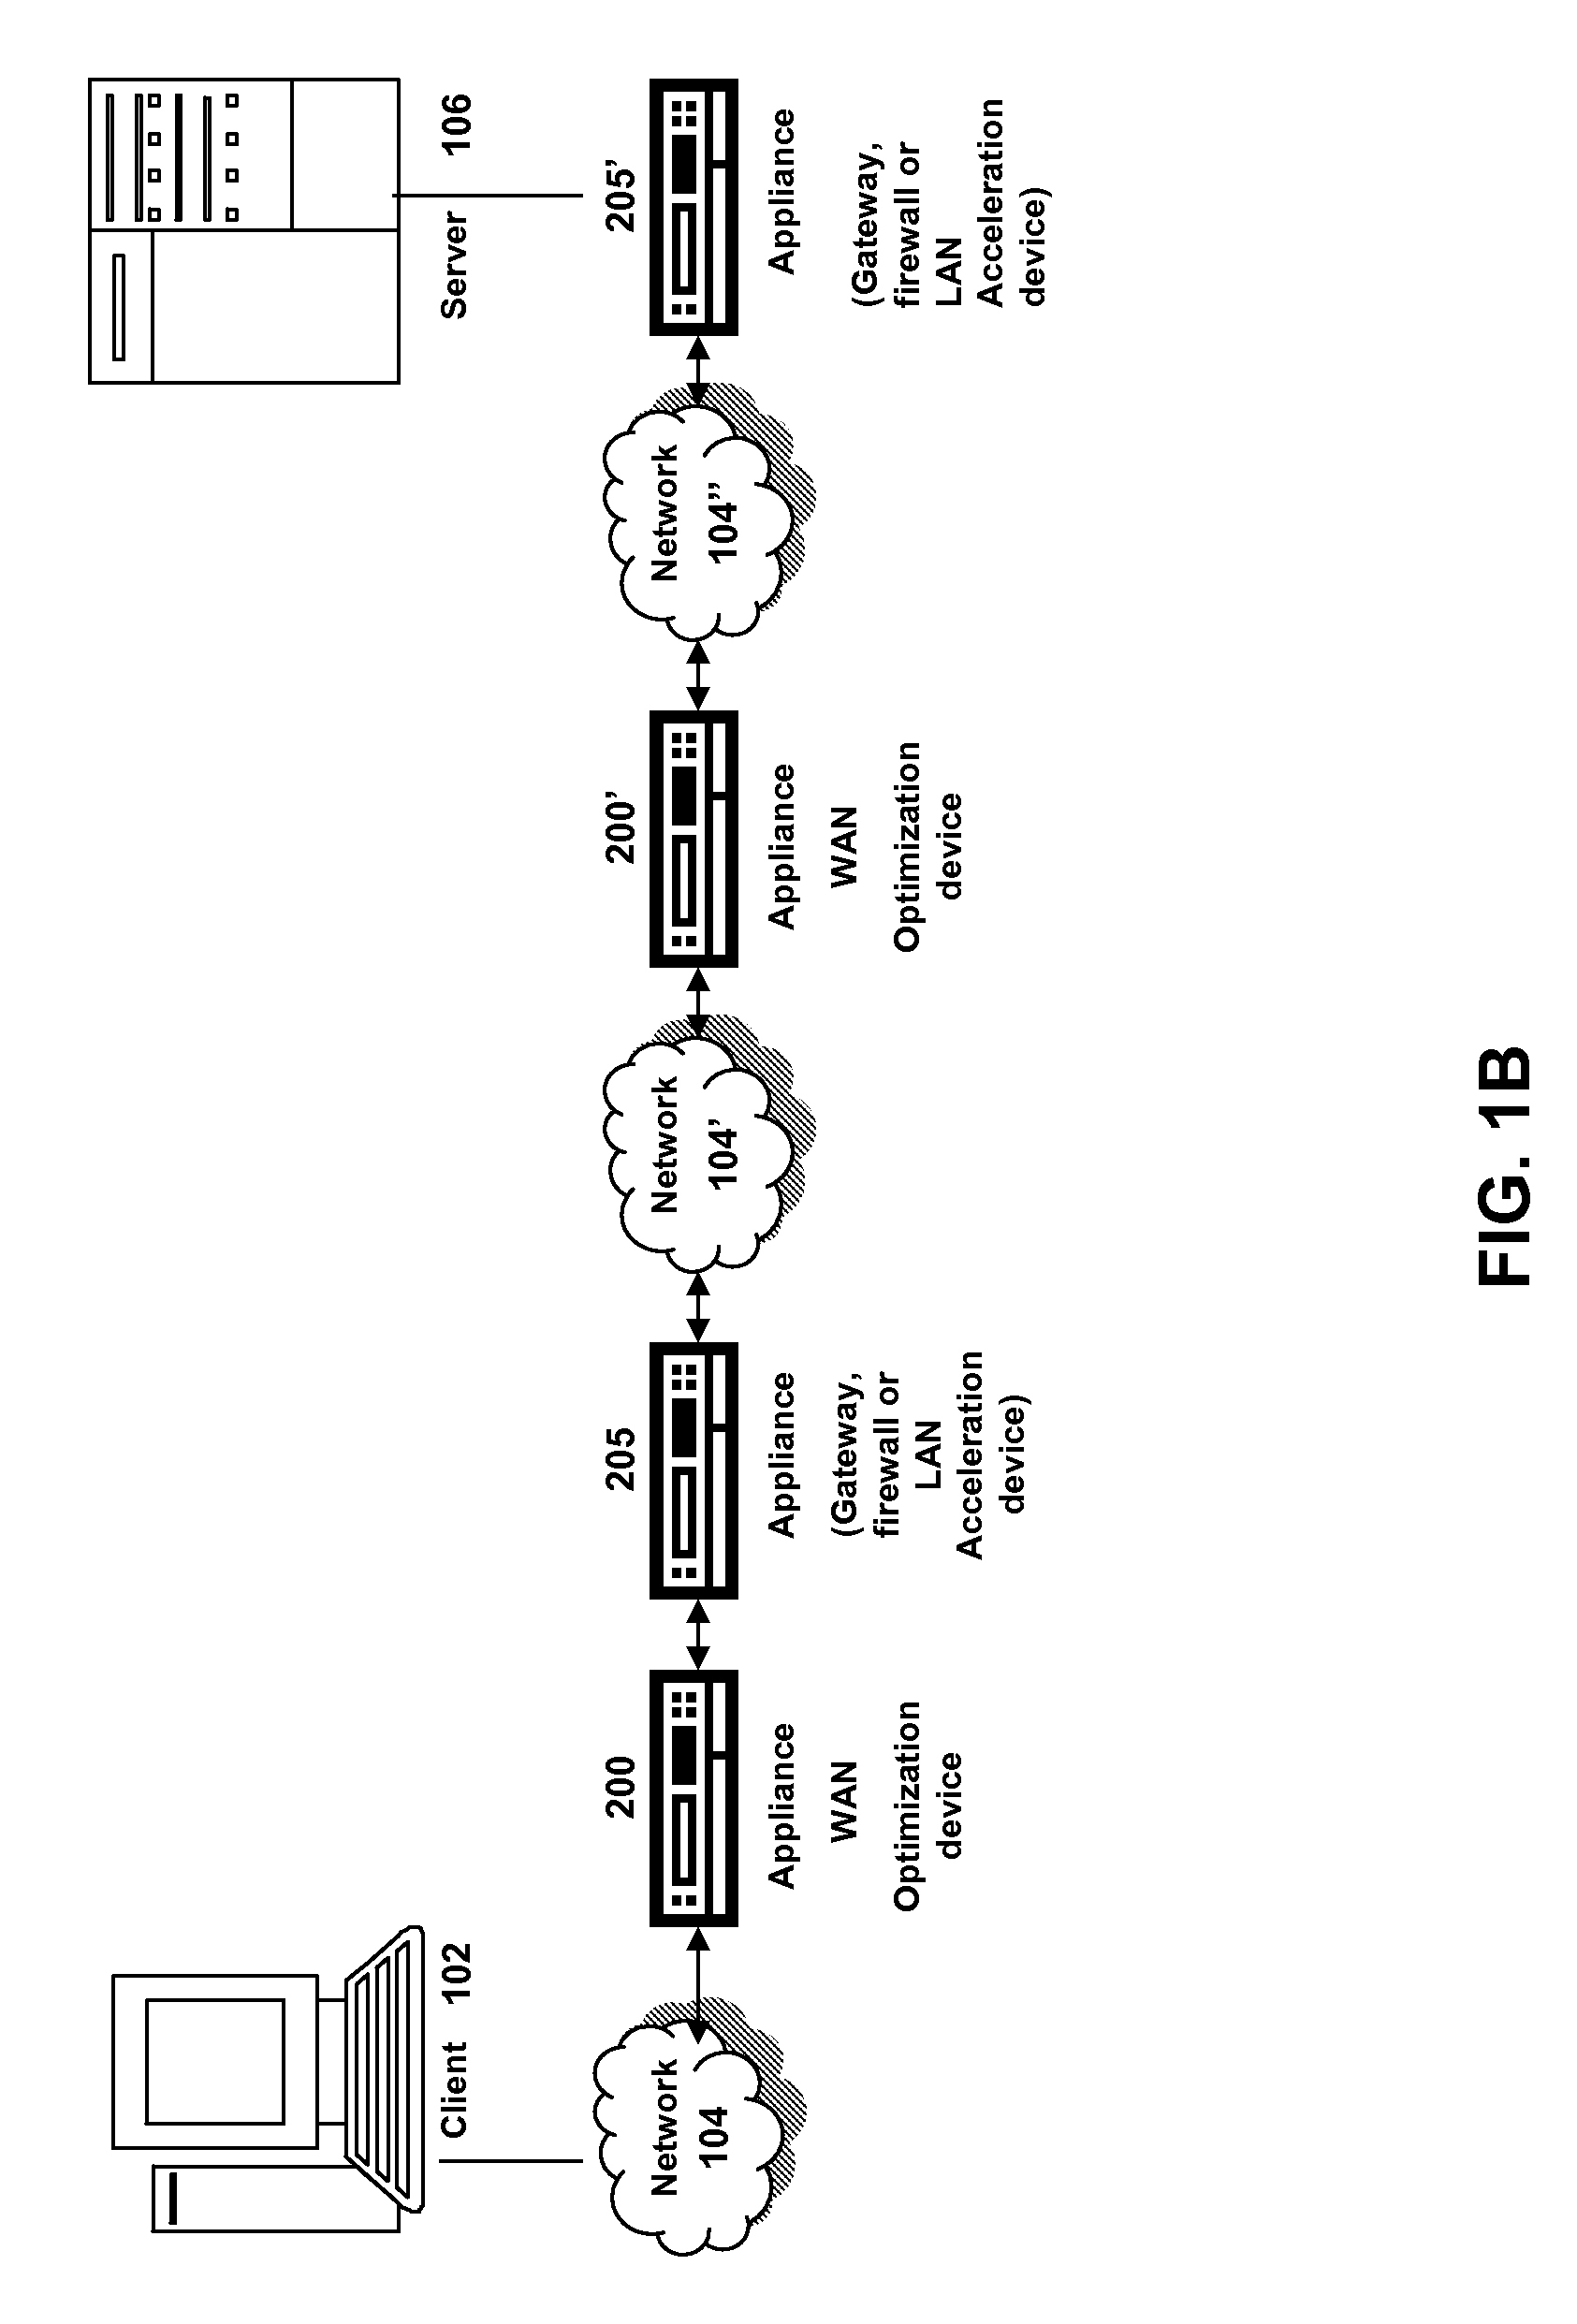 Systems and methods for additional retransmissions of dropped packets